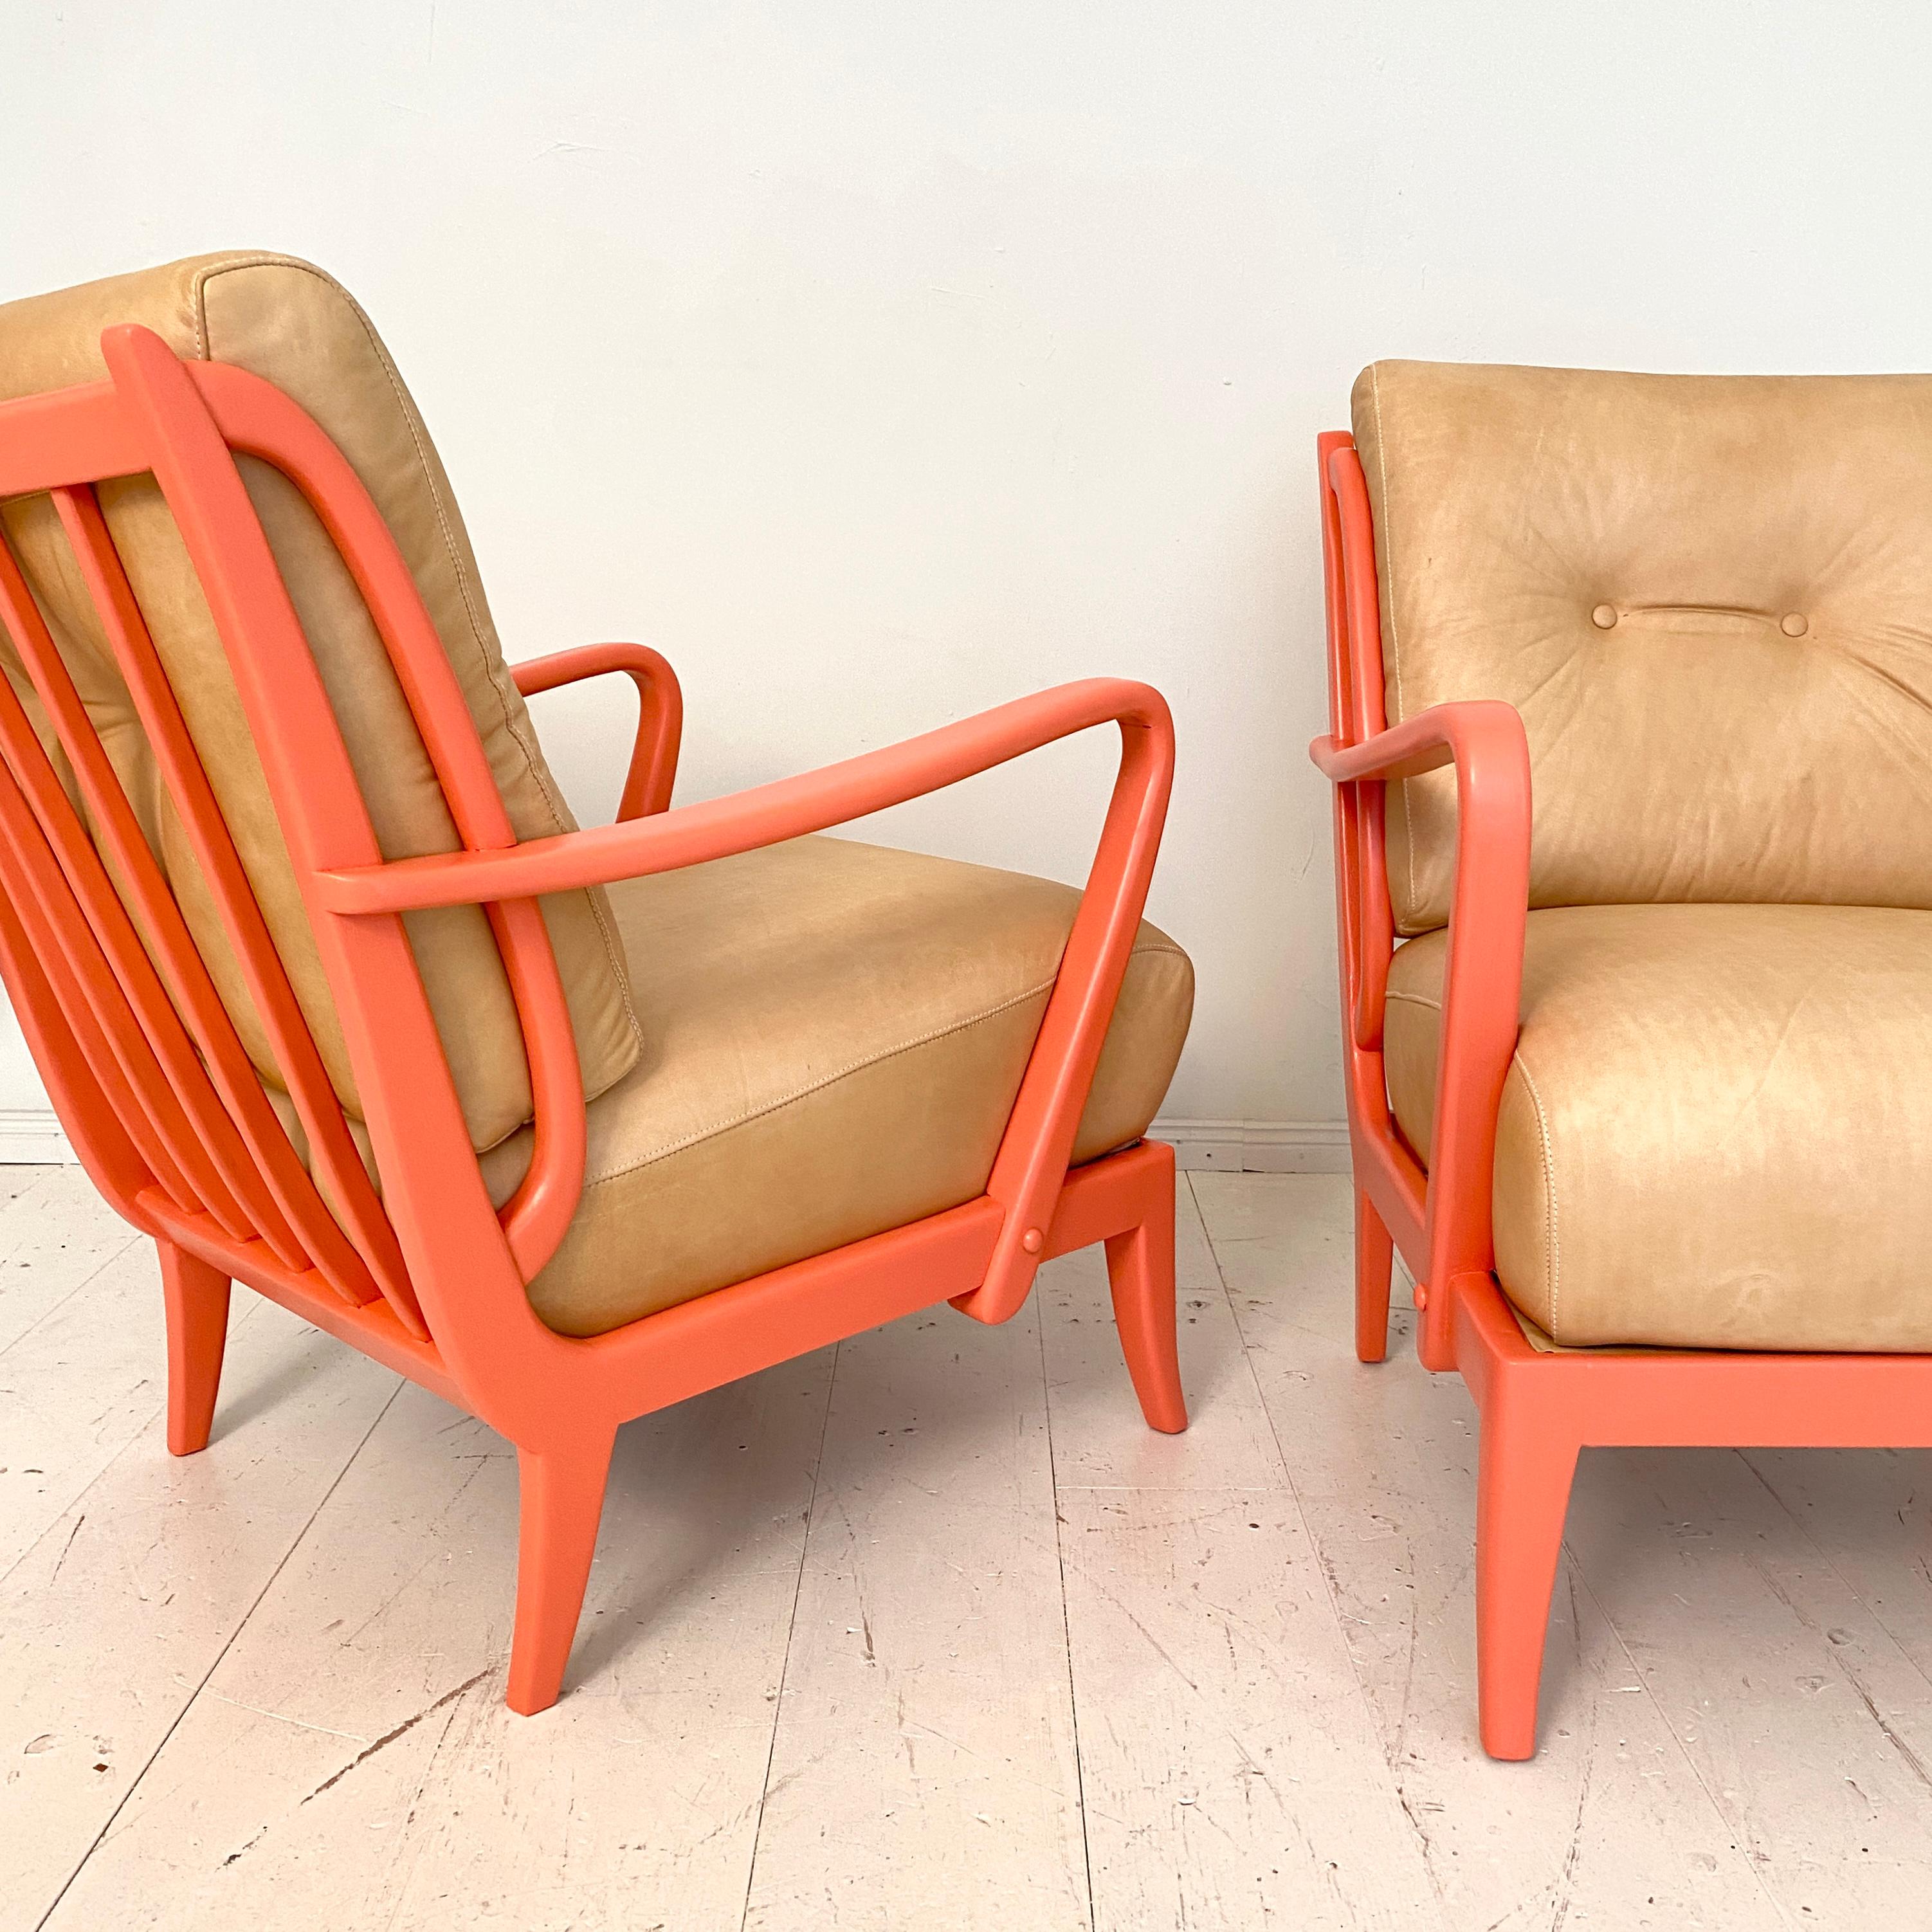 Mid-20th Century Pair of Italian Mid Century Lounge Chairs in Coral Color and Beige Leather, 1950